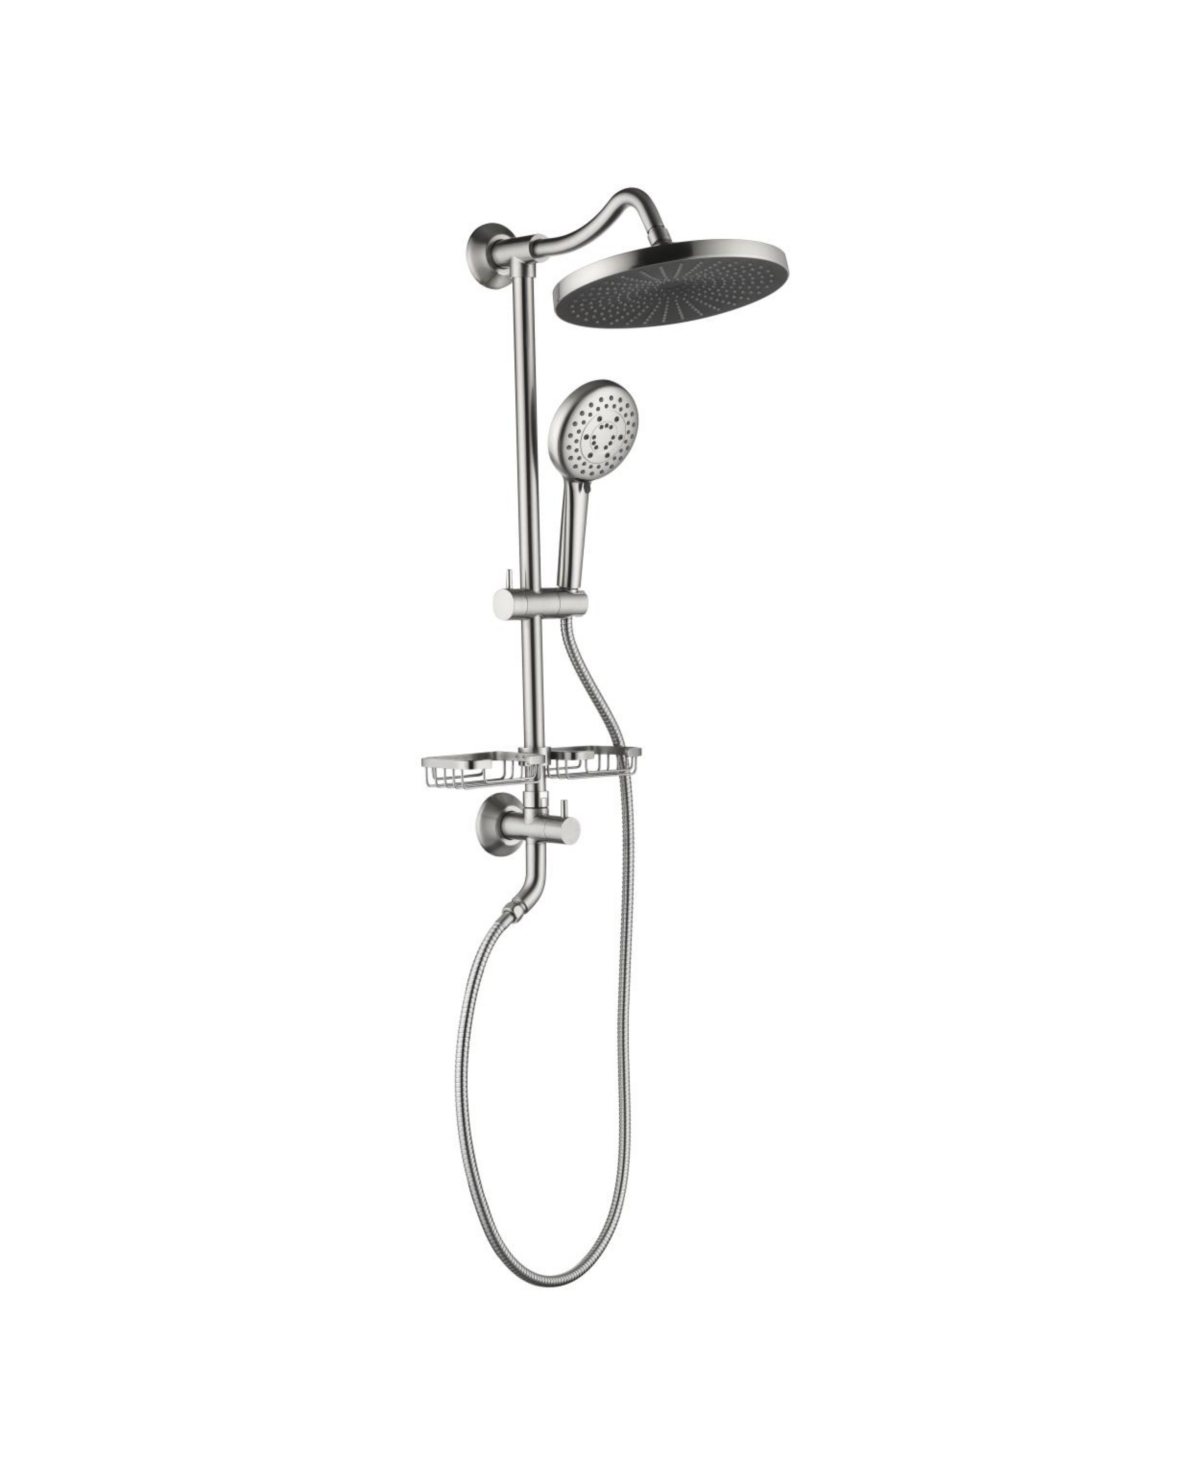 10" Rain Shower System with Hand Shower & Soap Dish - Silver